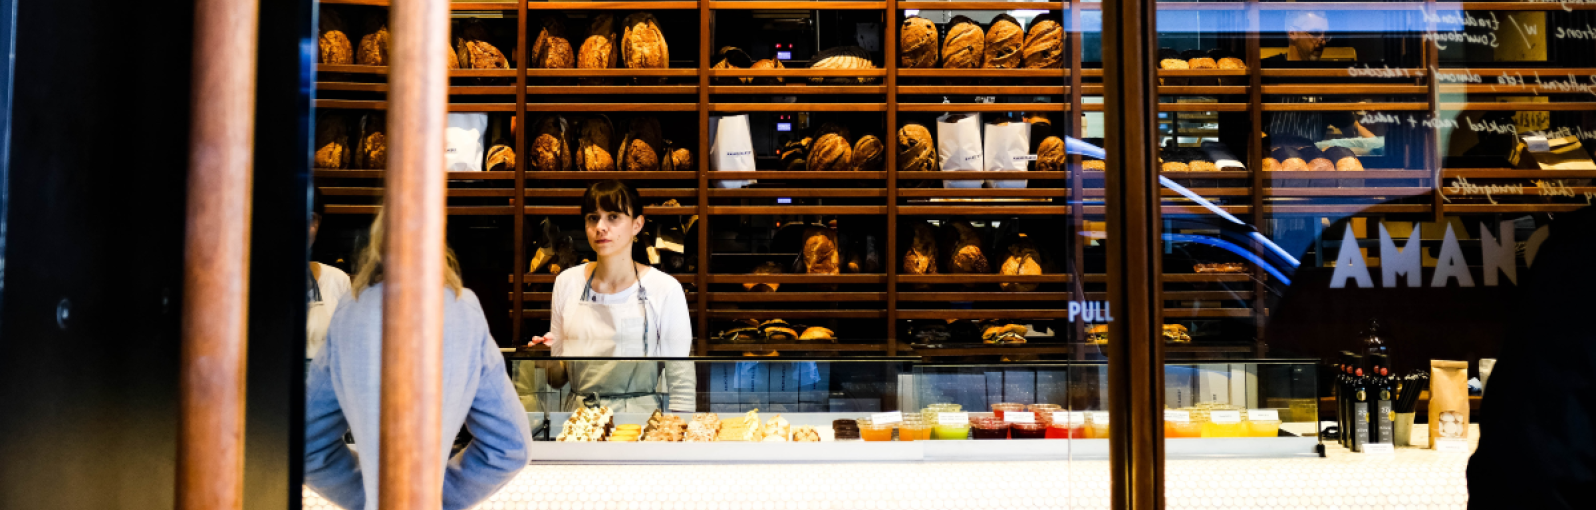 A person works in a bakery